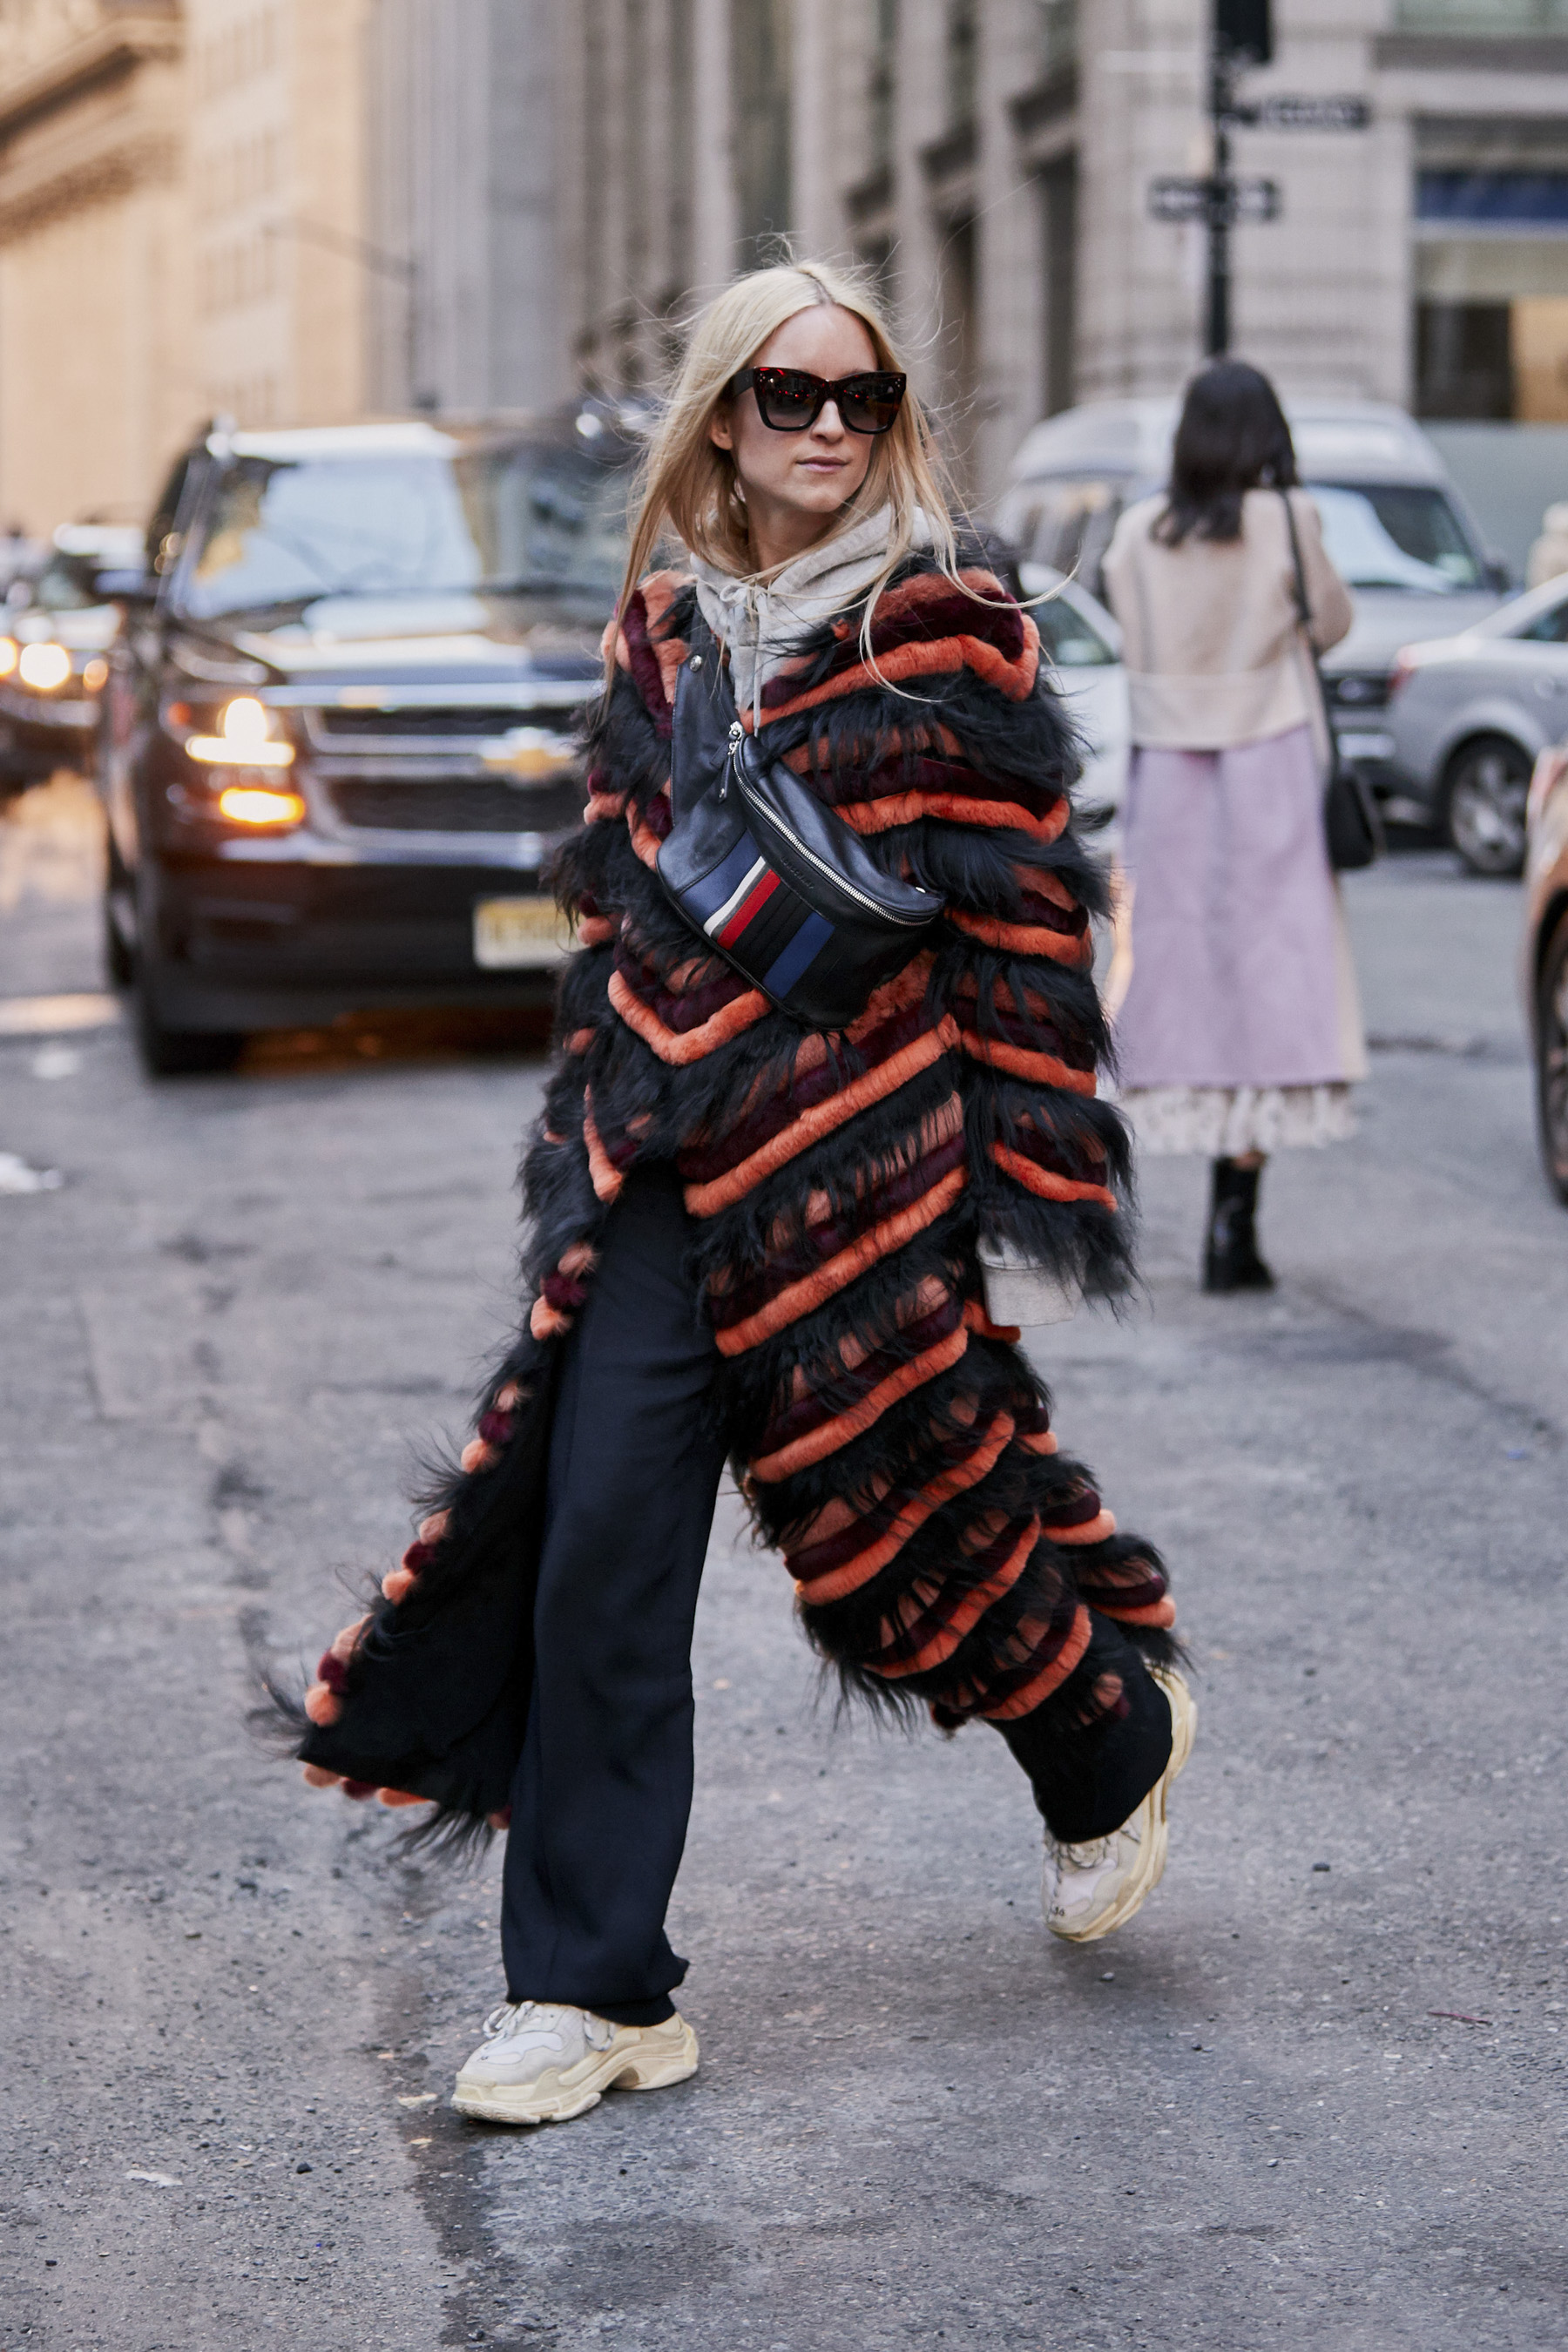 The Best Street Style From New York Fashion Week Fall 2019 | The Impression